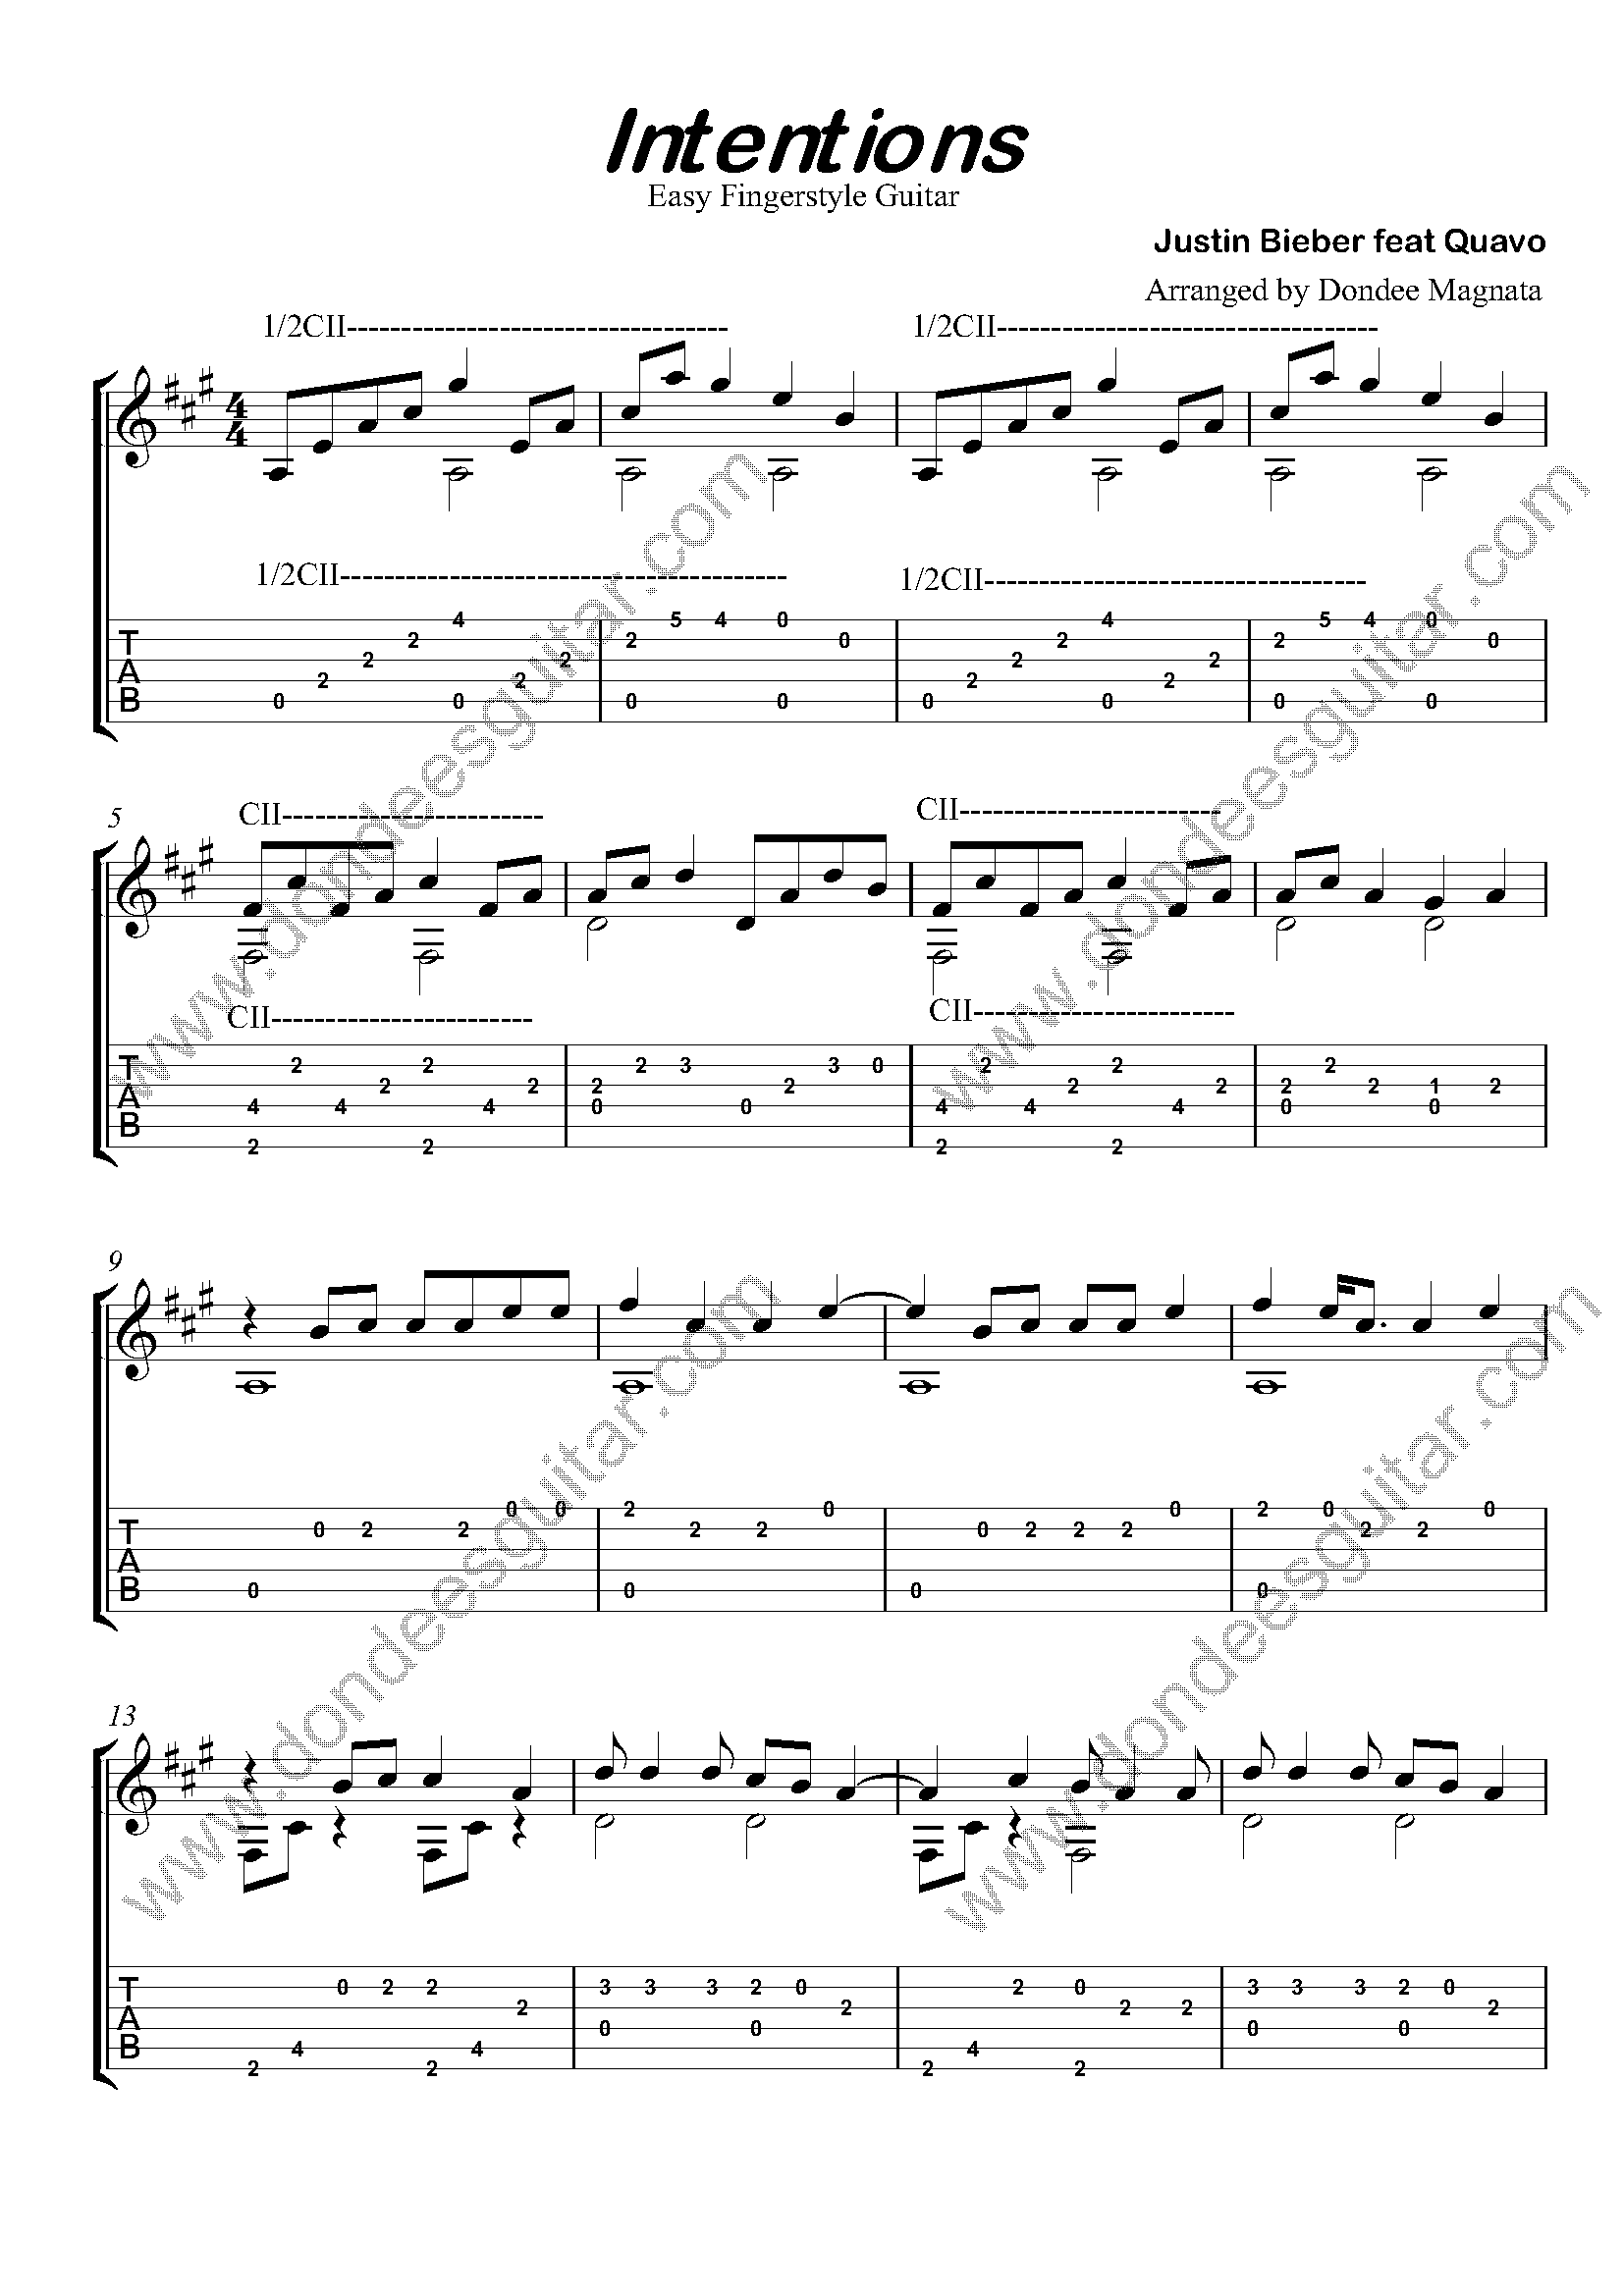 Intentions Fingerstyle Guitar Tabs